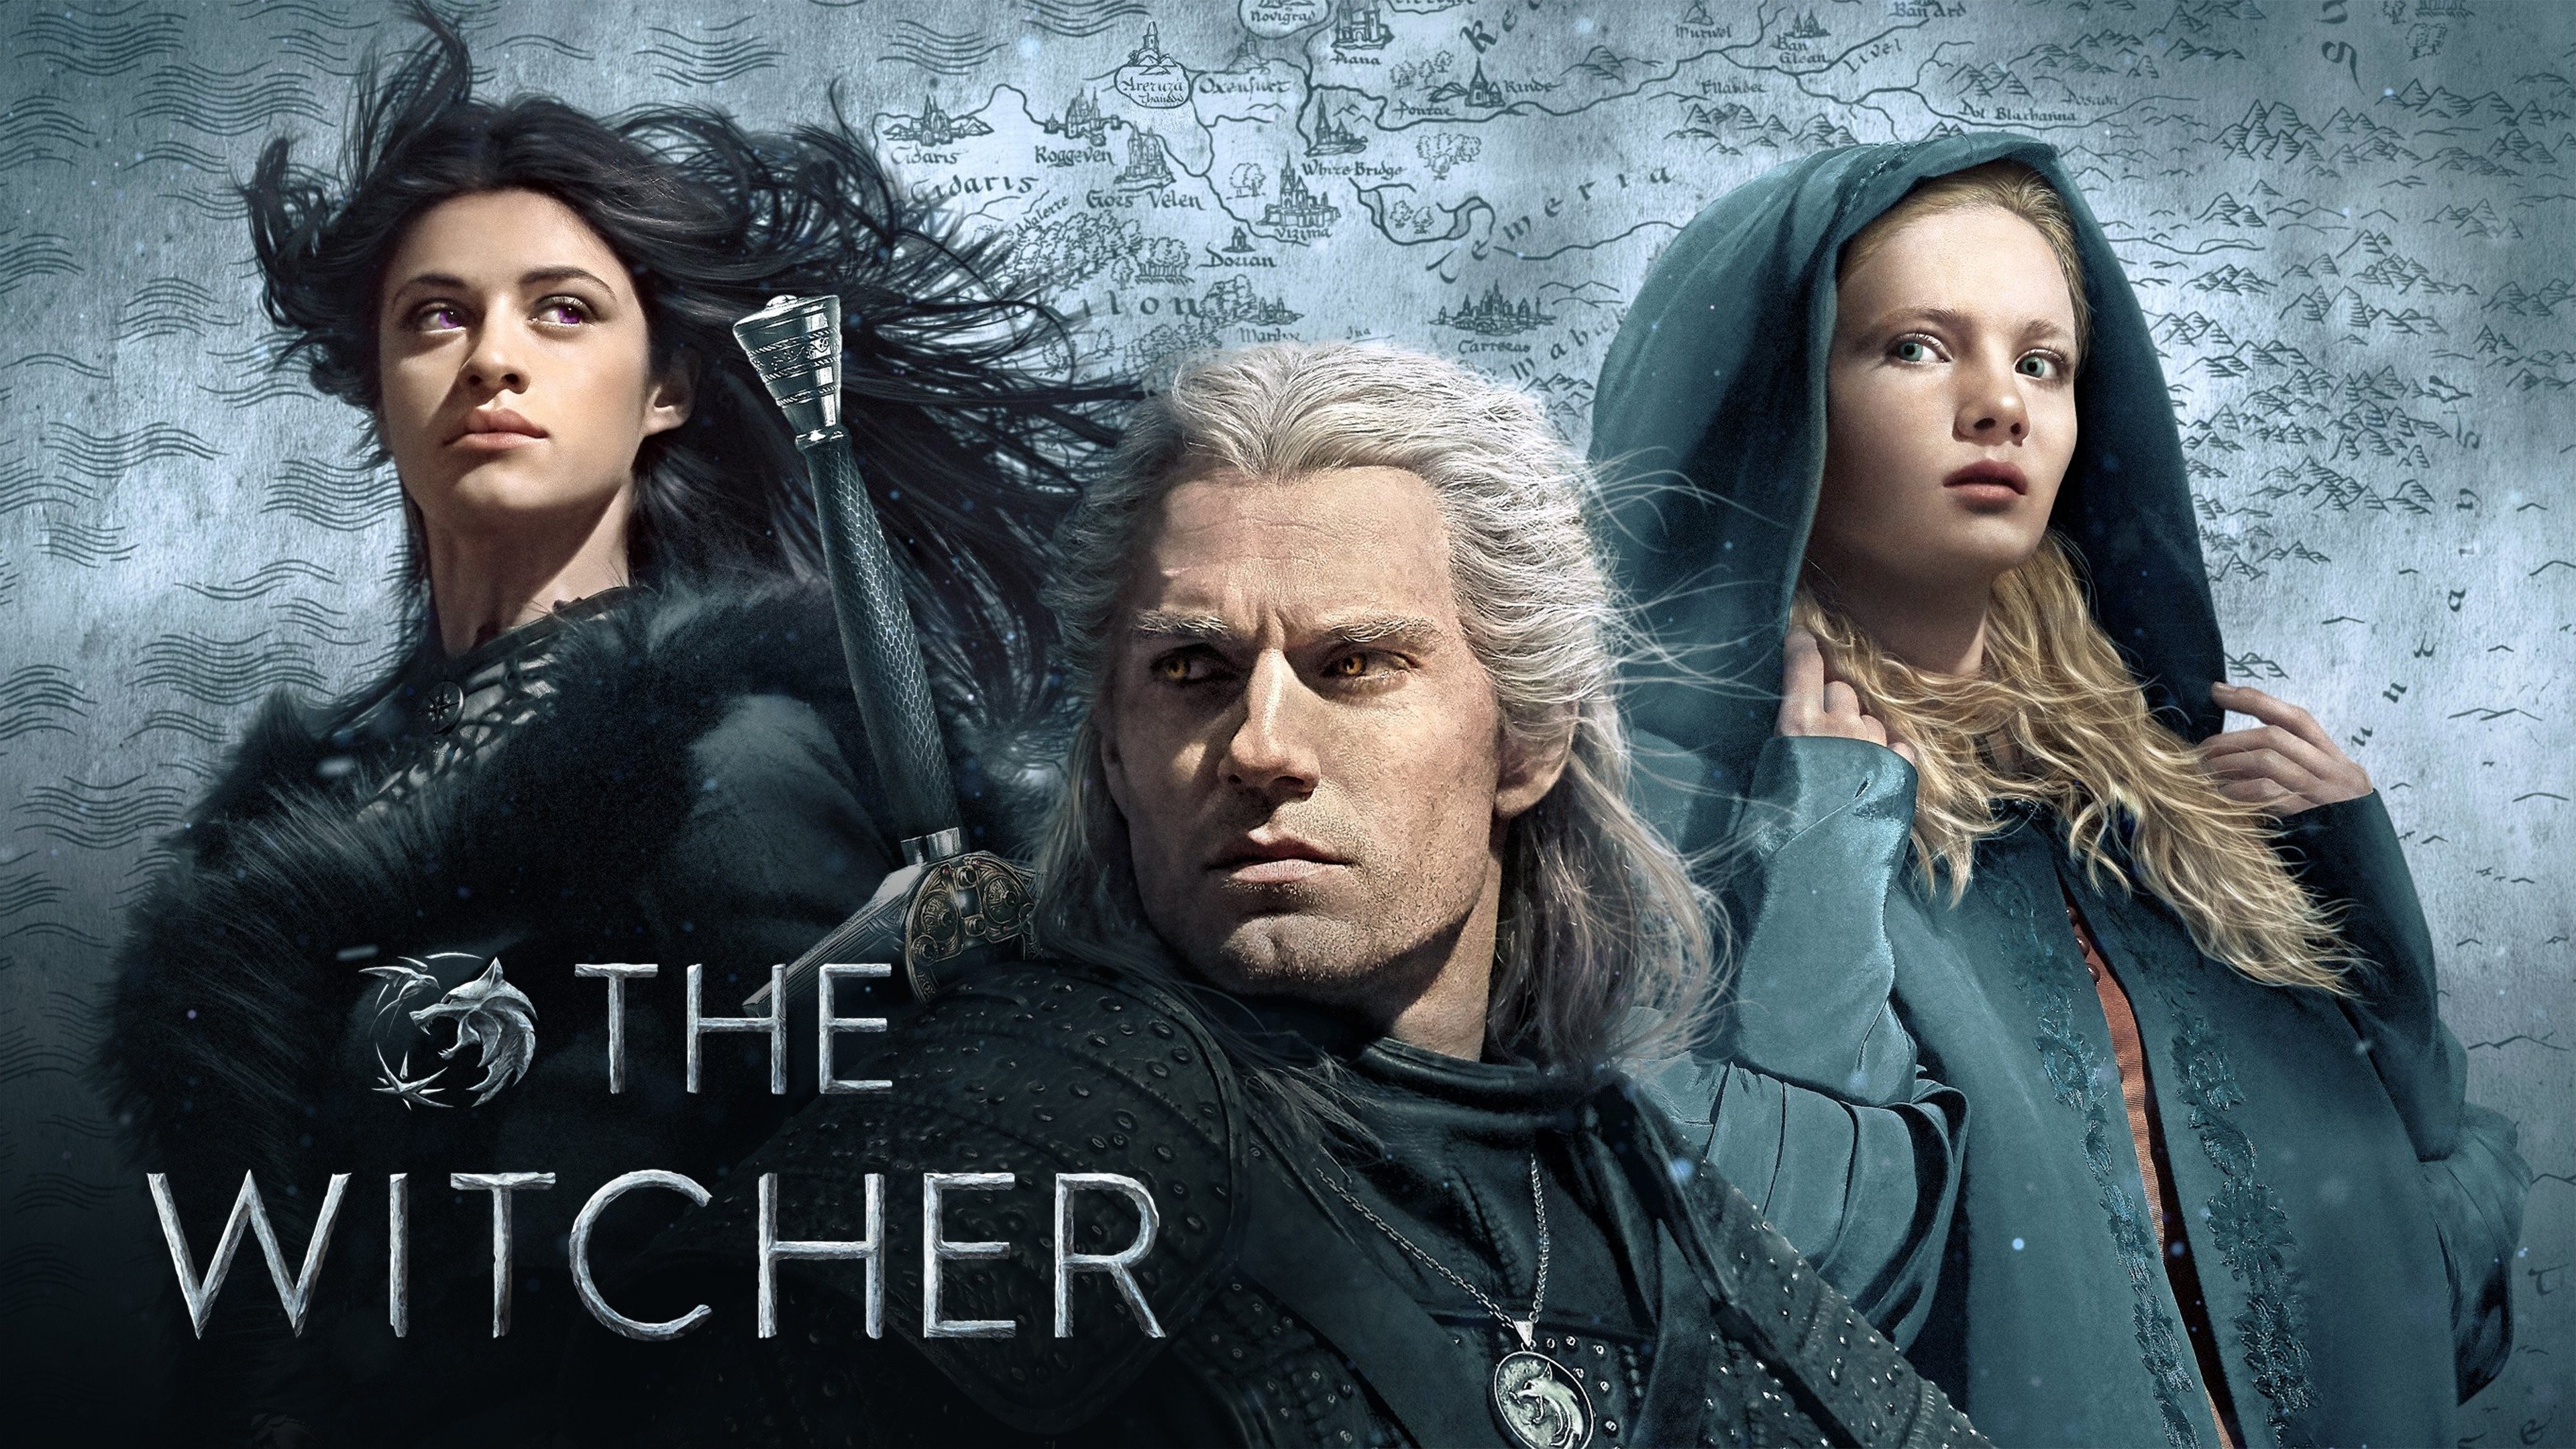 The Witcher - Rotten Tomatoes